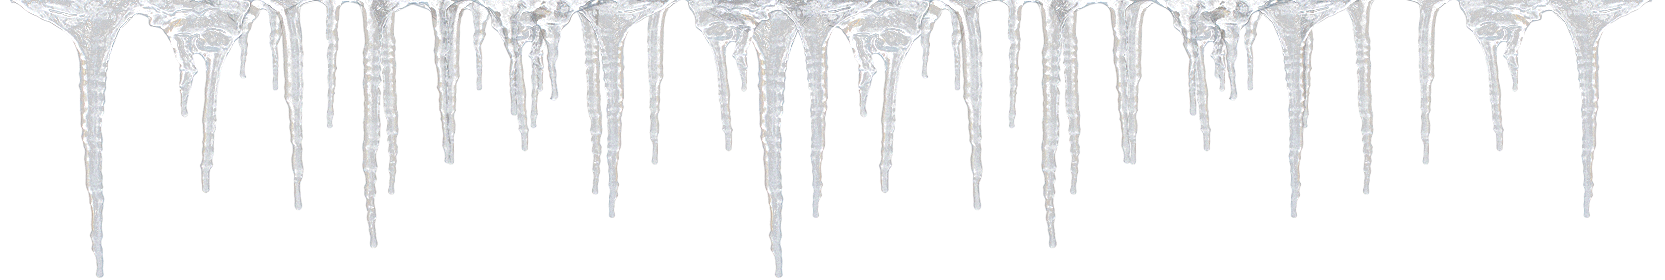 Icicles Royalty Free Stock Im